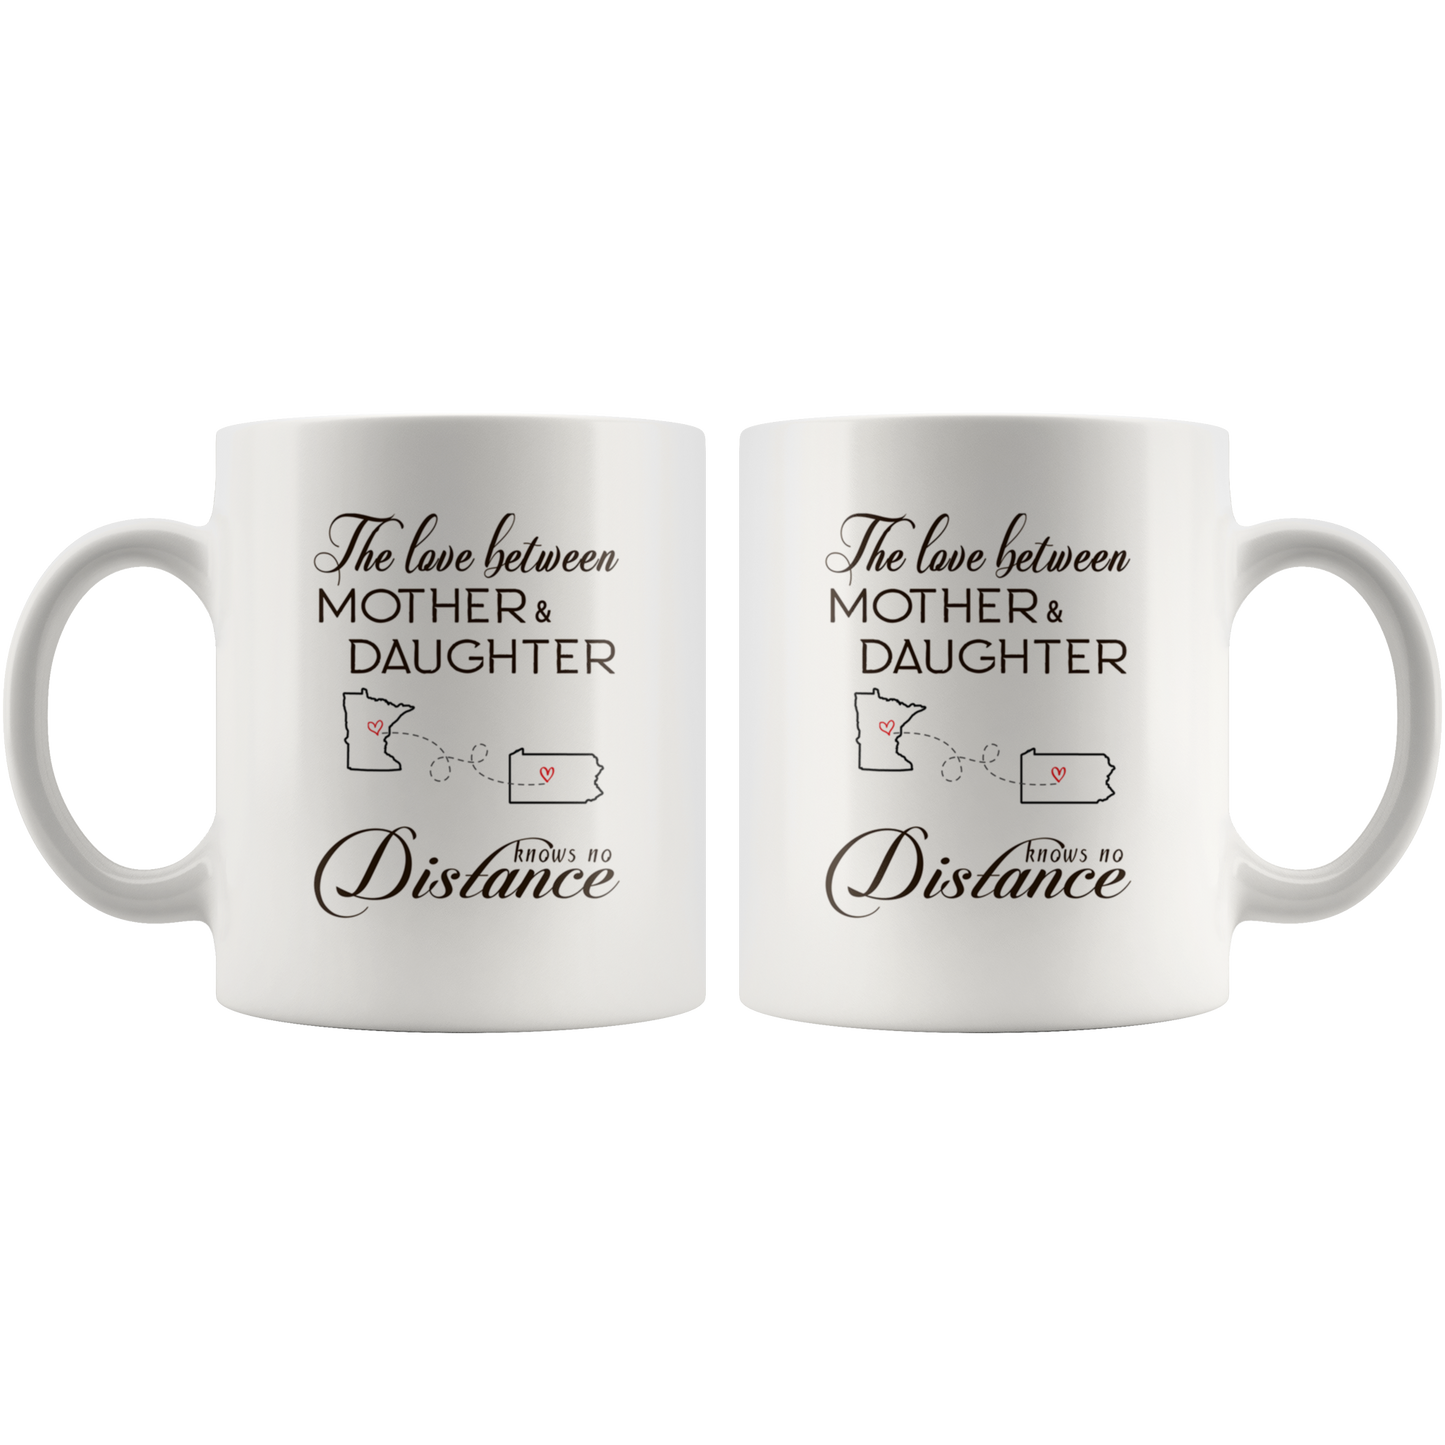 ND20604535-15oz-sp-23687 - [ Minnesota | Pennsylvania | Mother And Daughter ]Personalized Long Distance State Coffee Mug - The Love Betwe